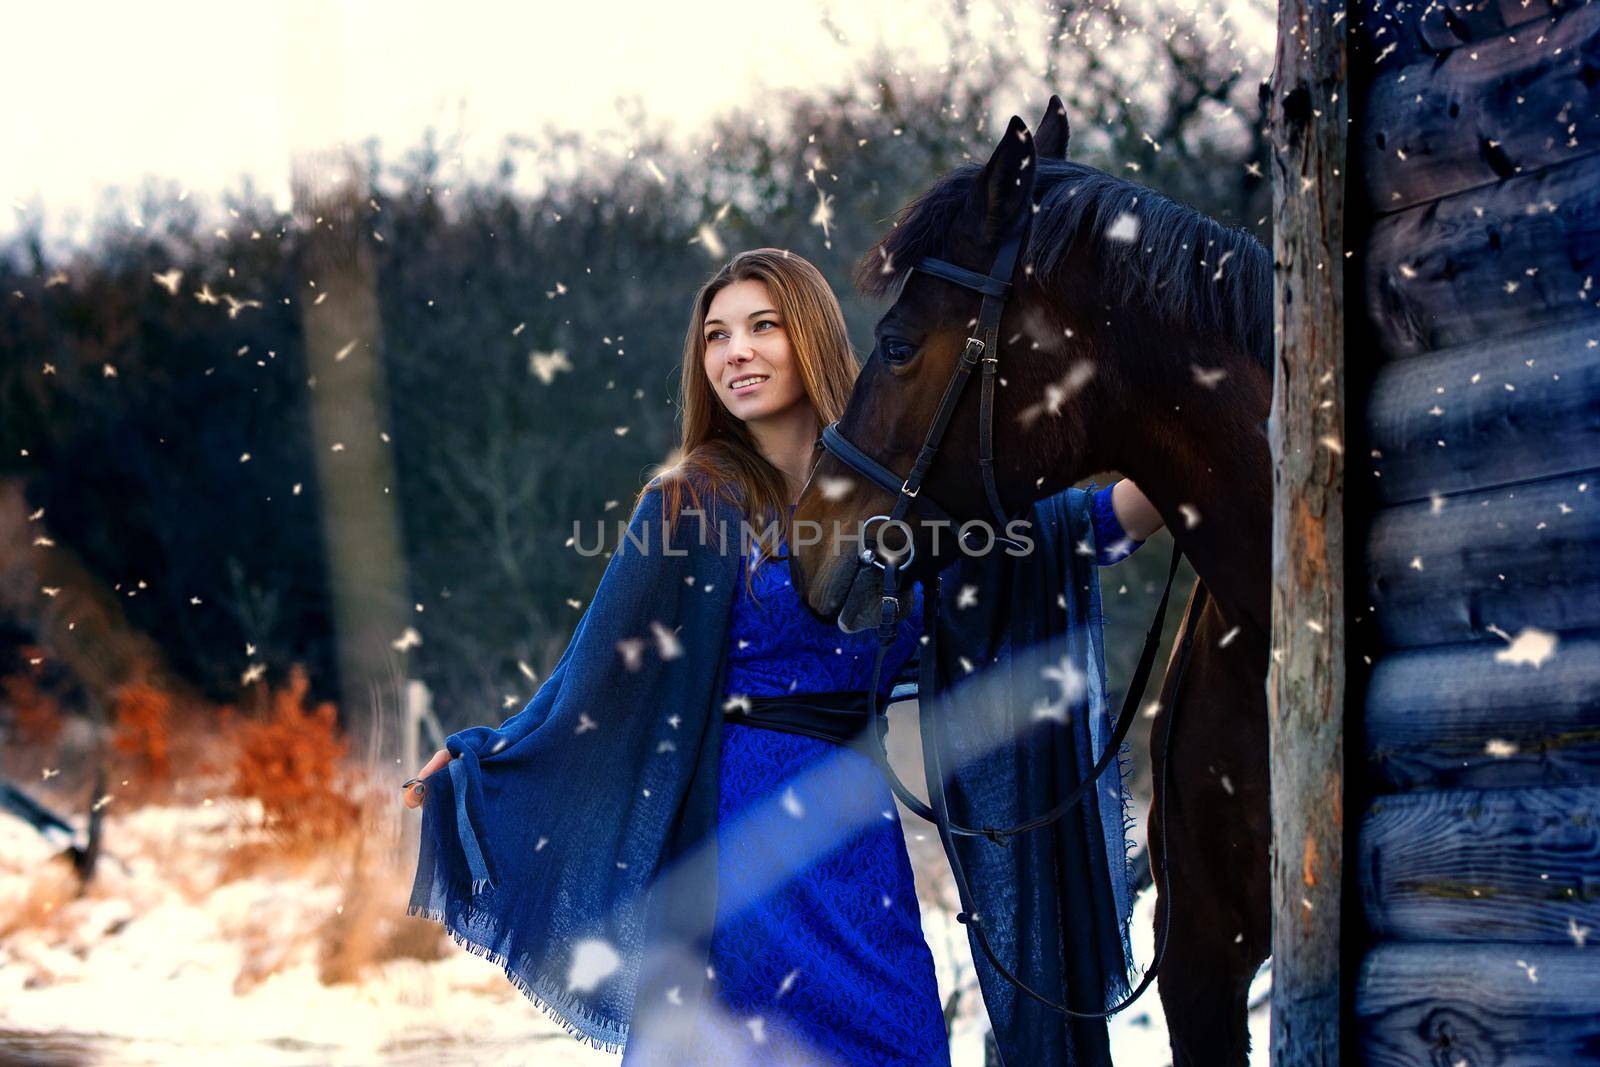 Beautiful girl in a blue stole stands next to a horse near wooden buildings on a snowy winter day by Madhourse